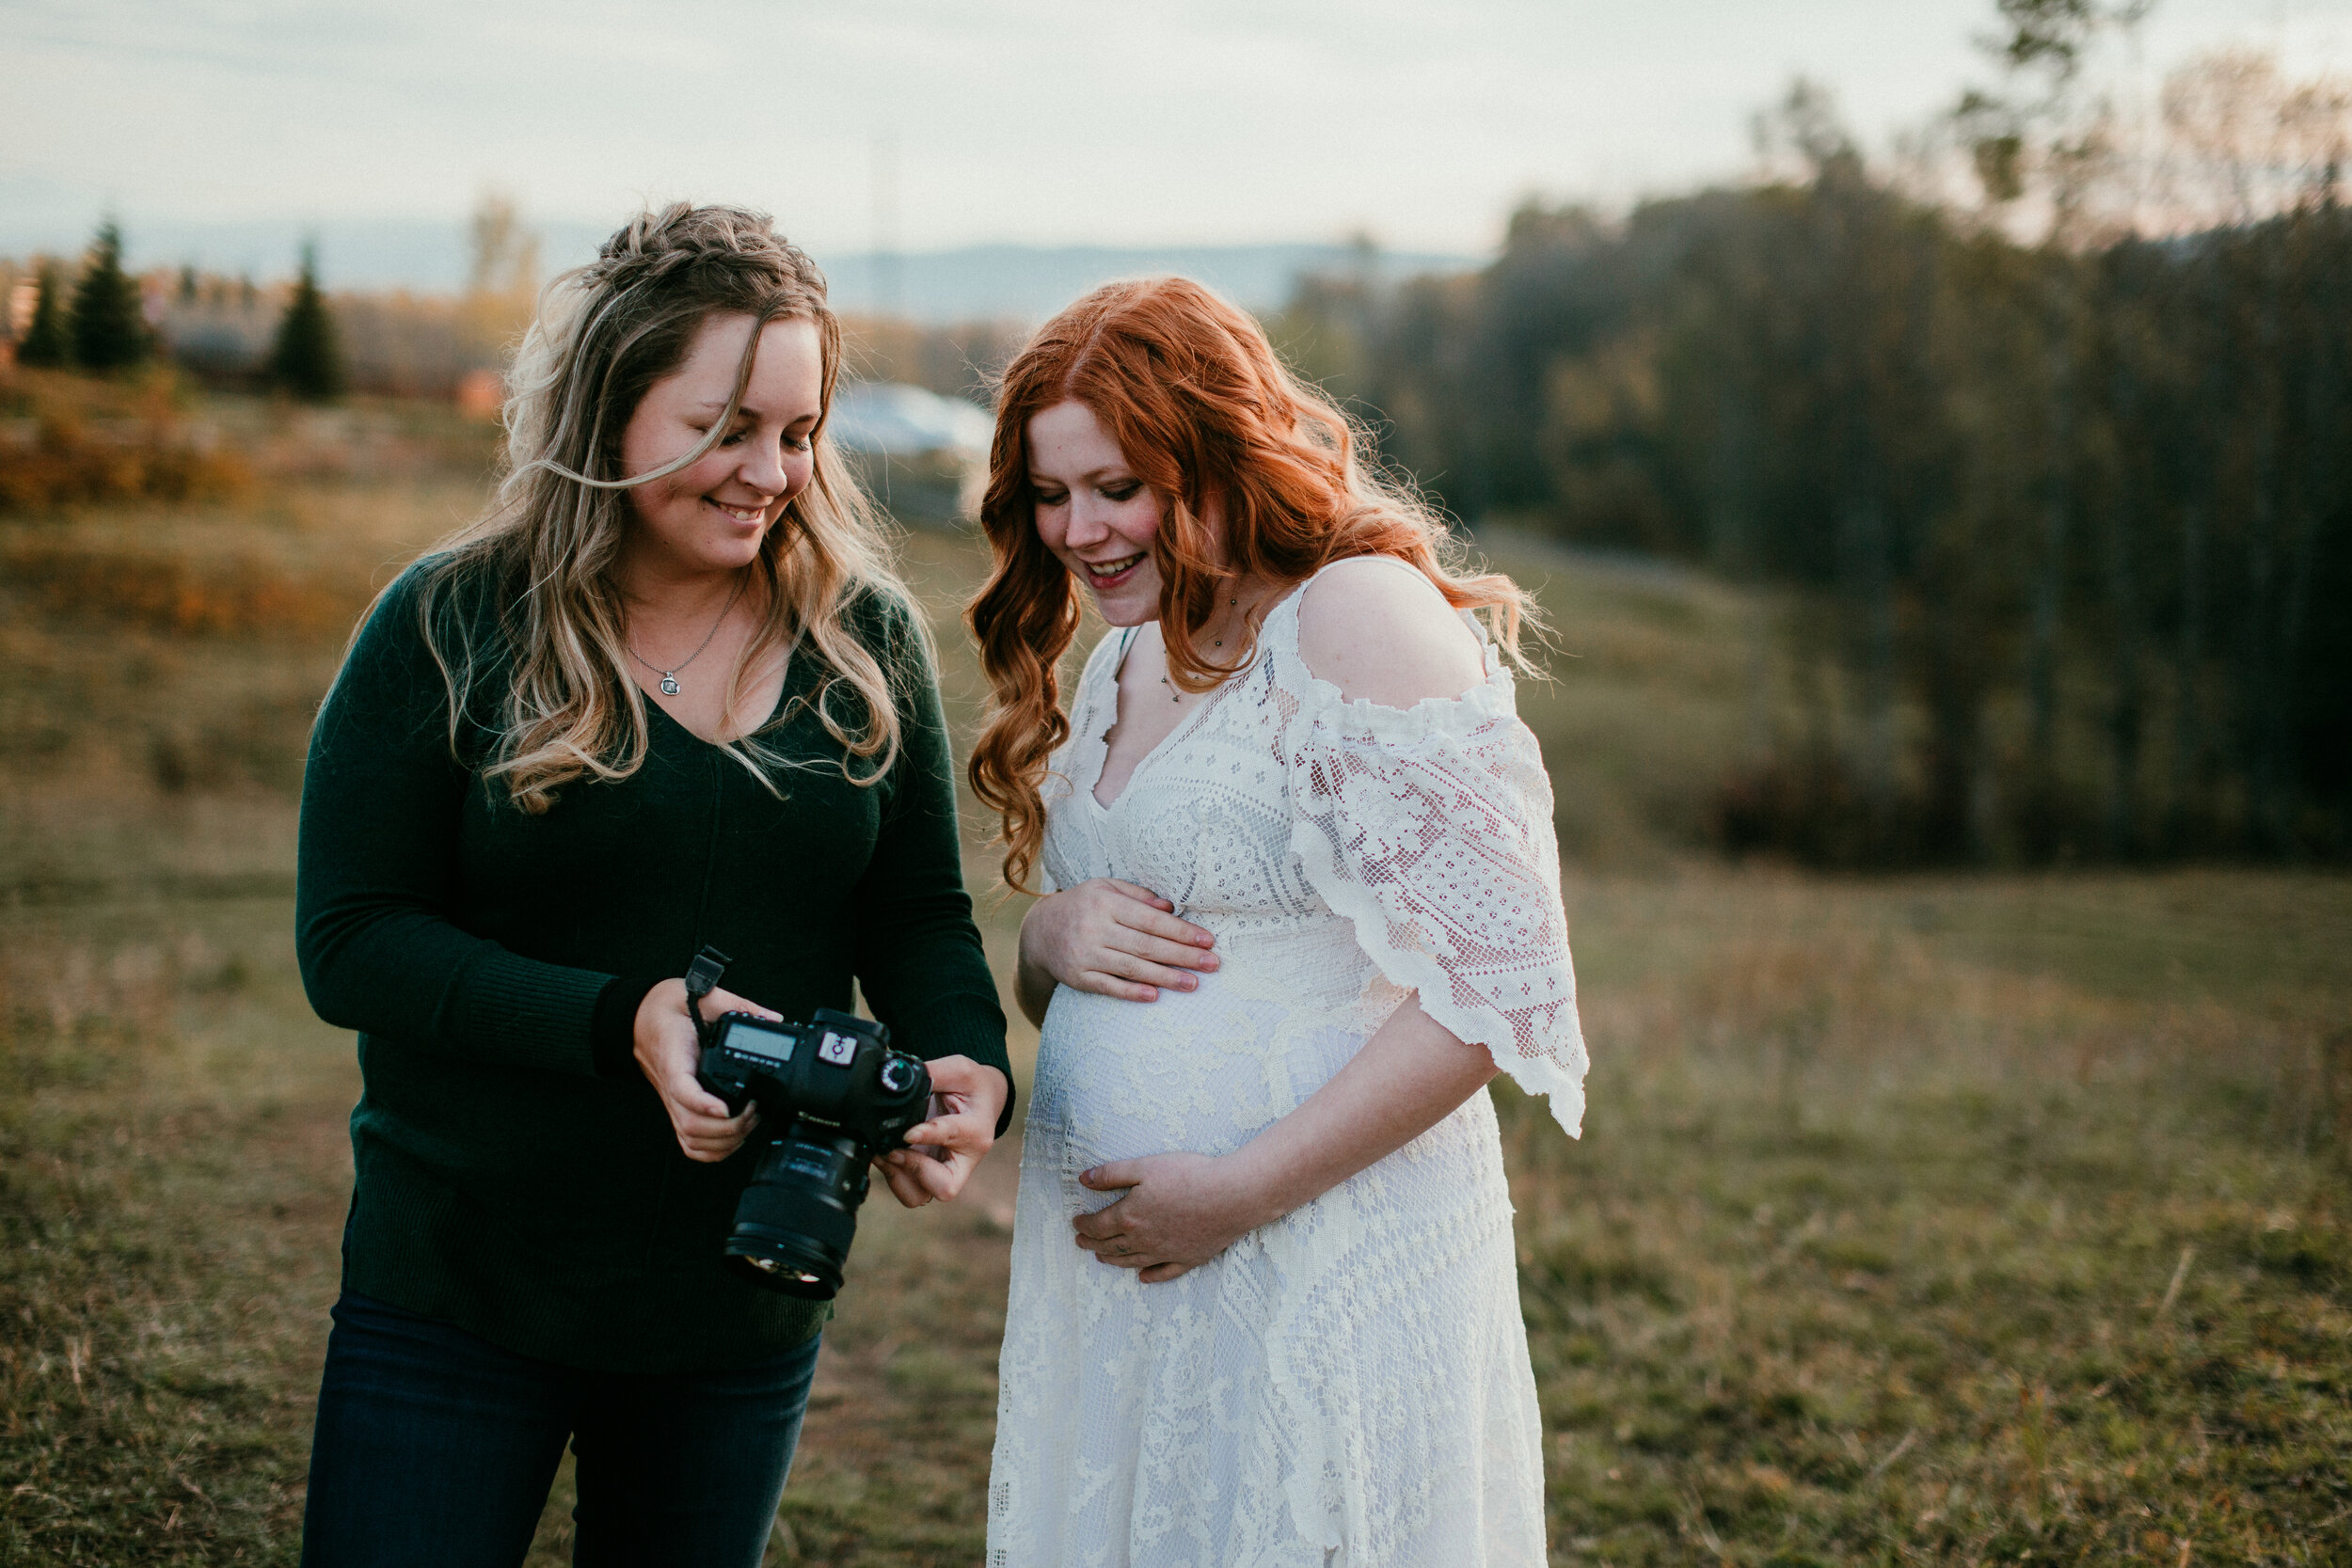 Behind the Scenes of Ashlee during a Maternity Session